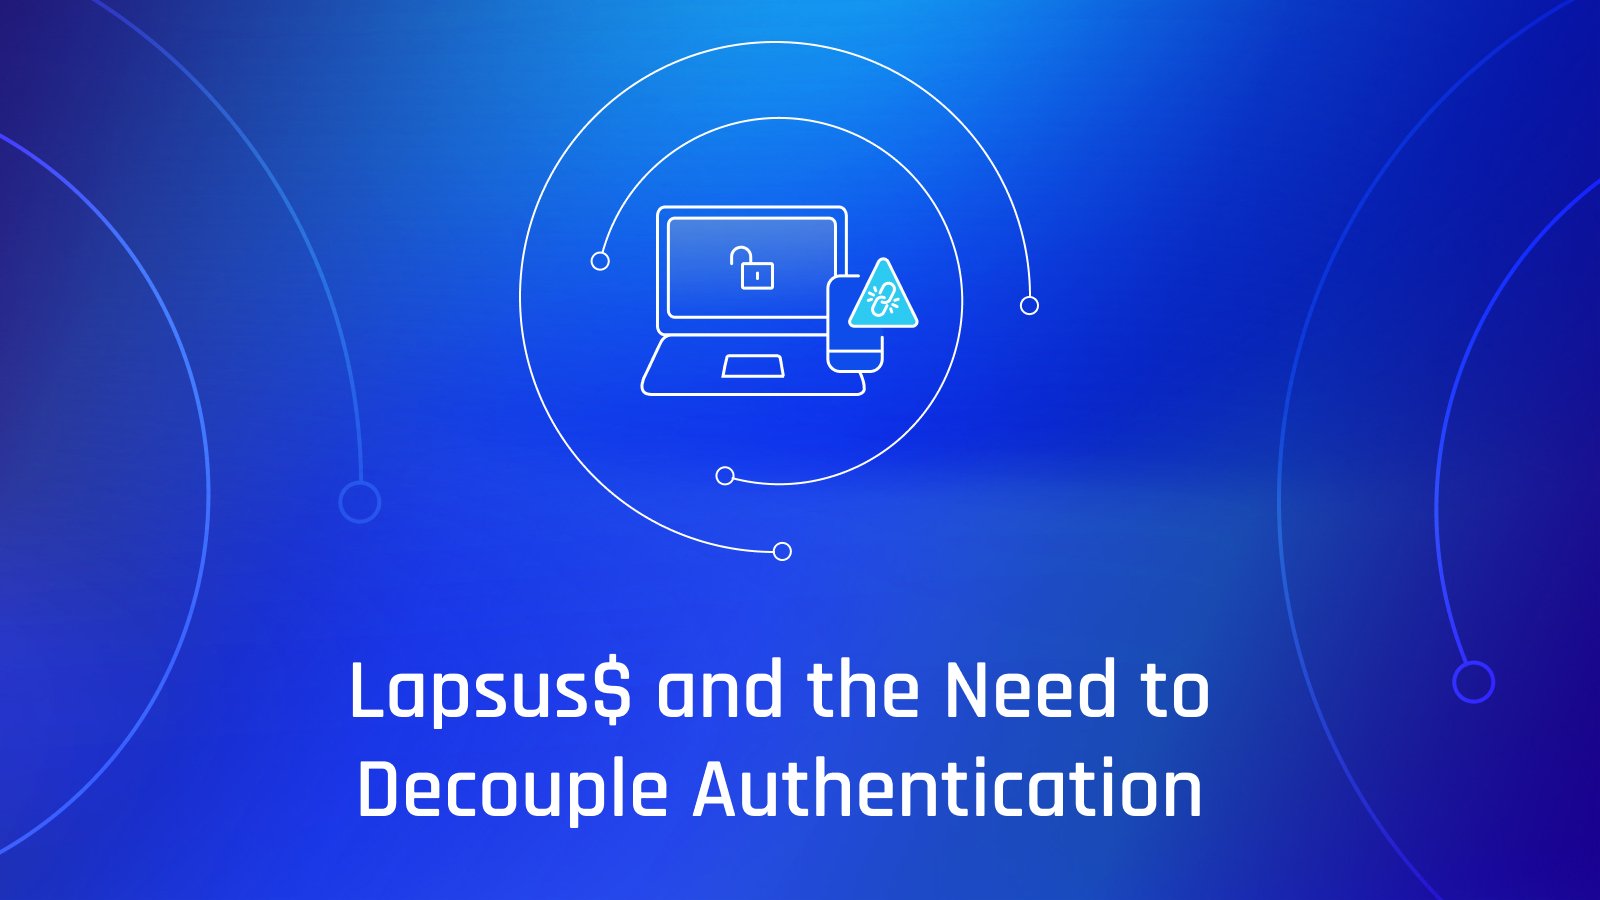 Lapsus$ and the need for decoupled authentication